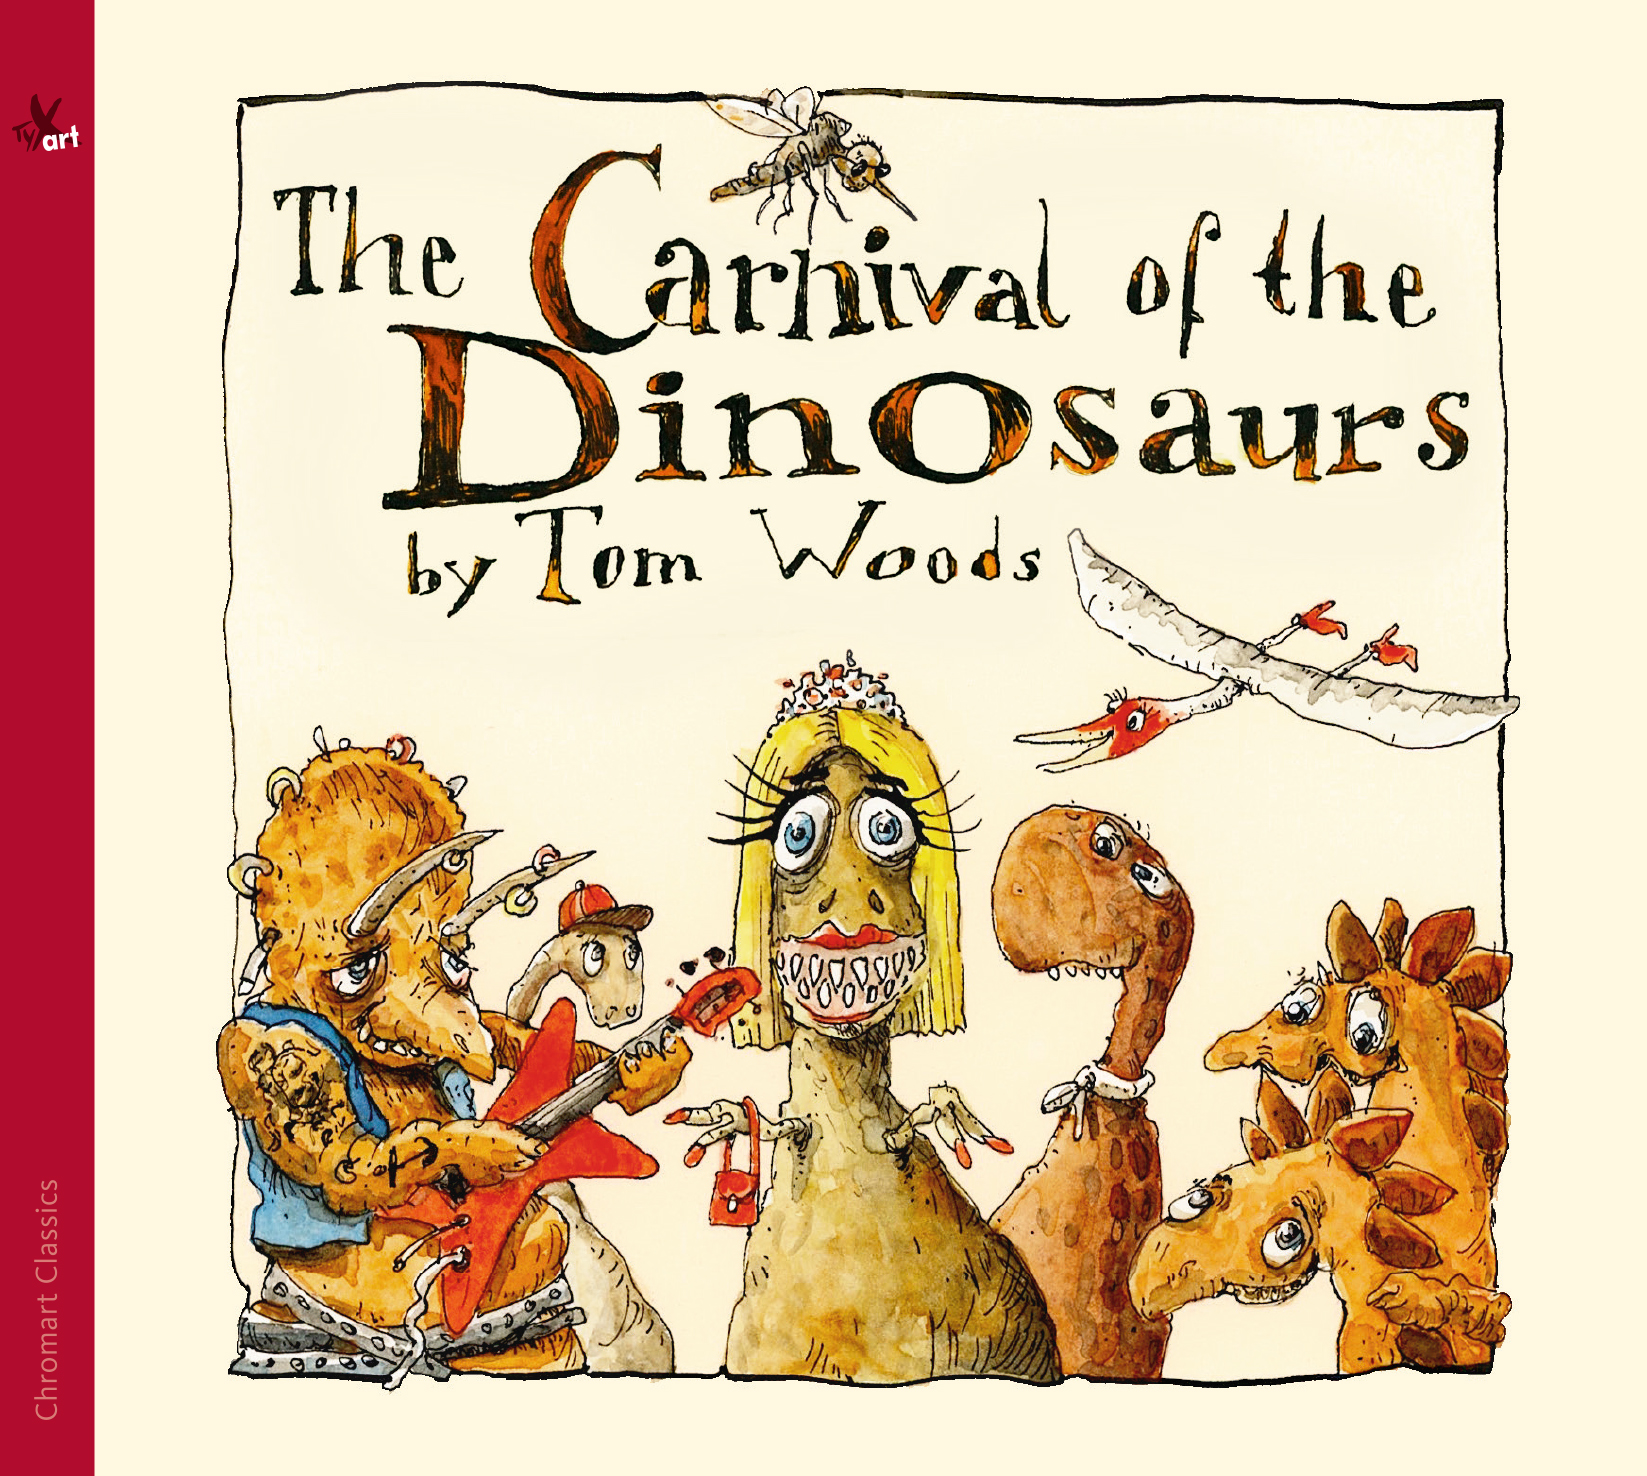 Tom Woods: The Carnival of the Dinosaurs - A musical fairytale